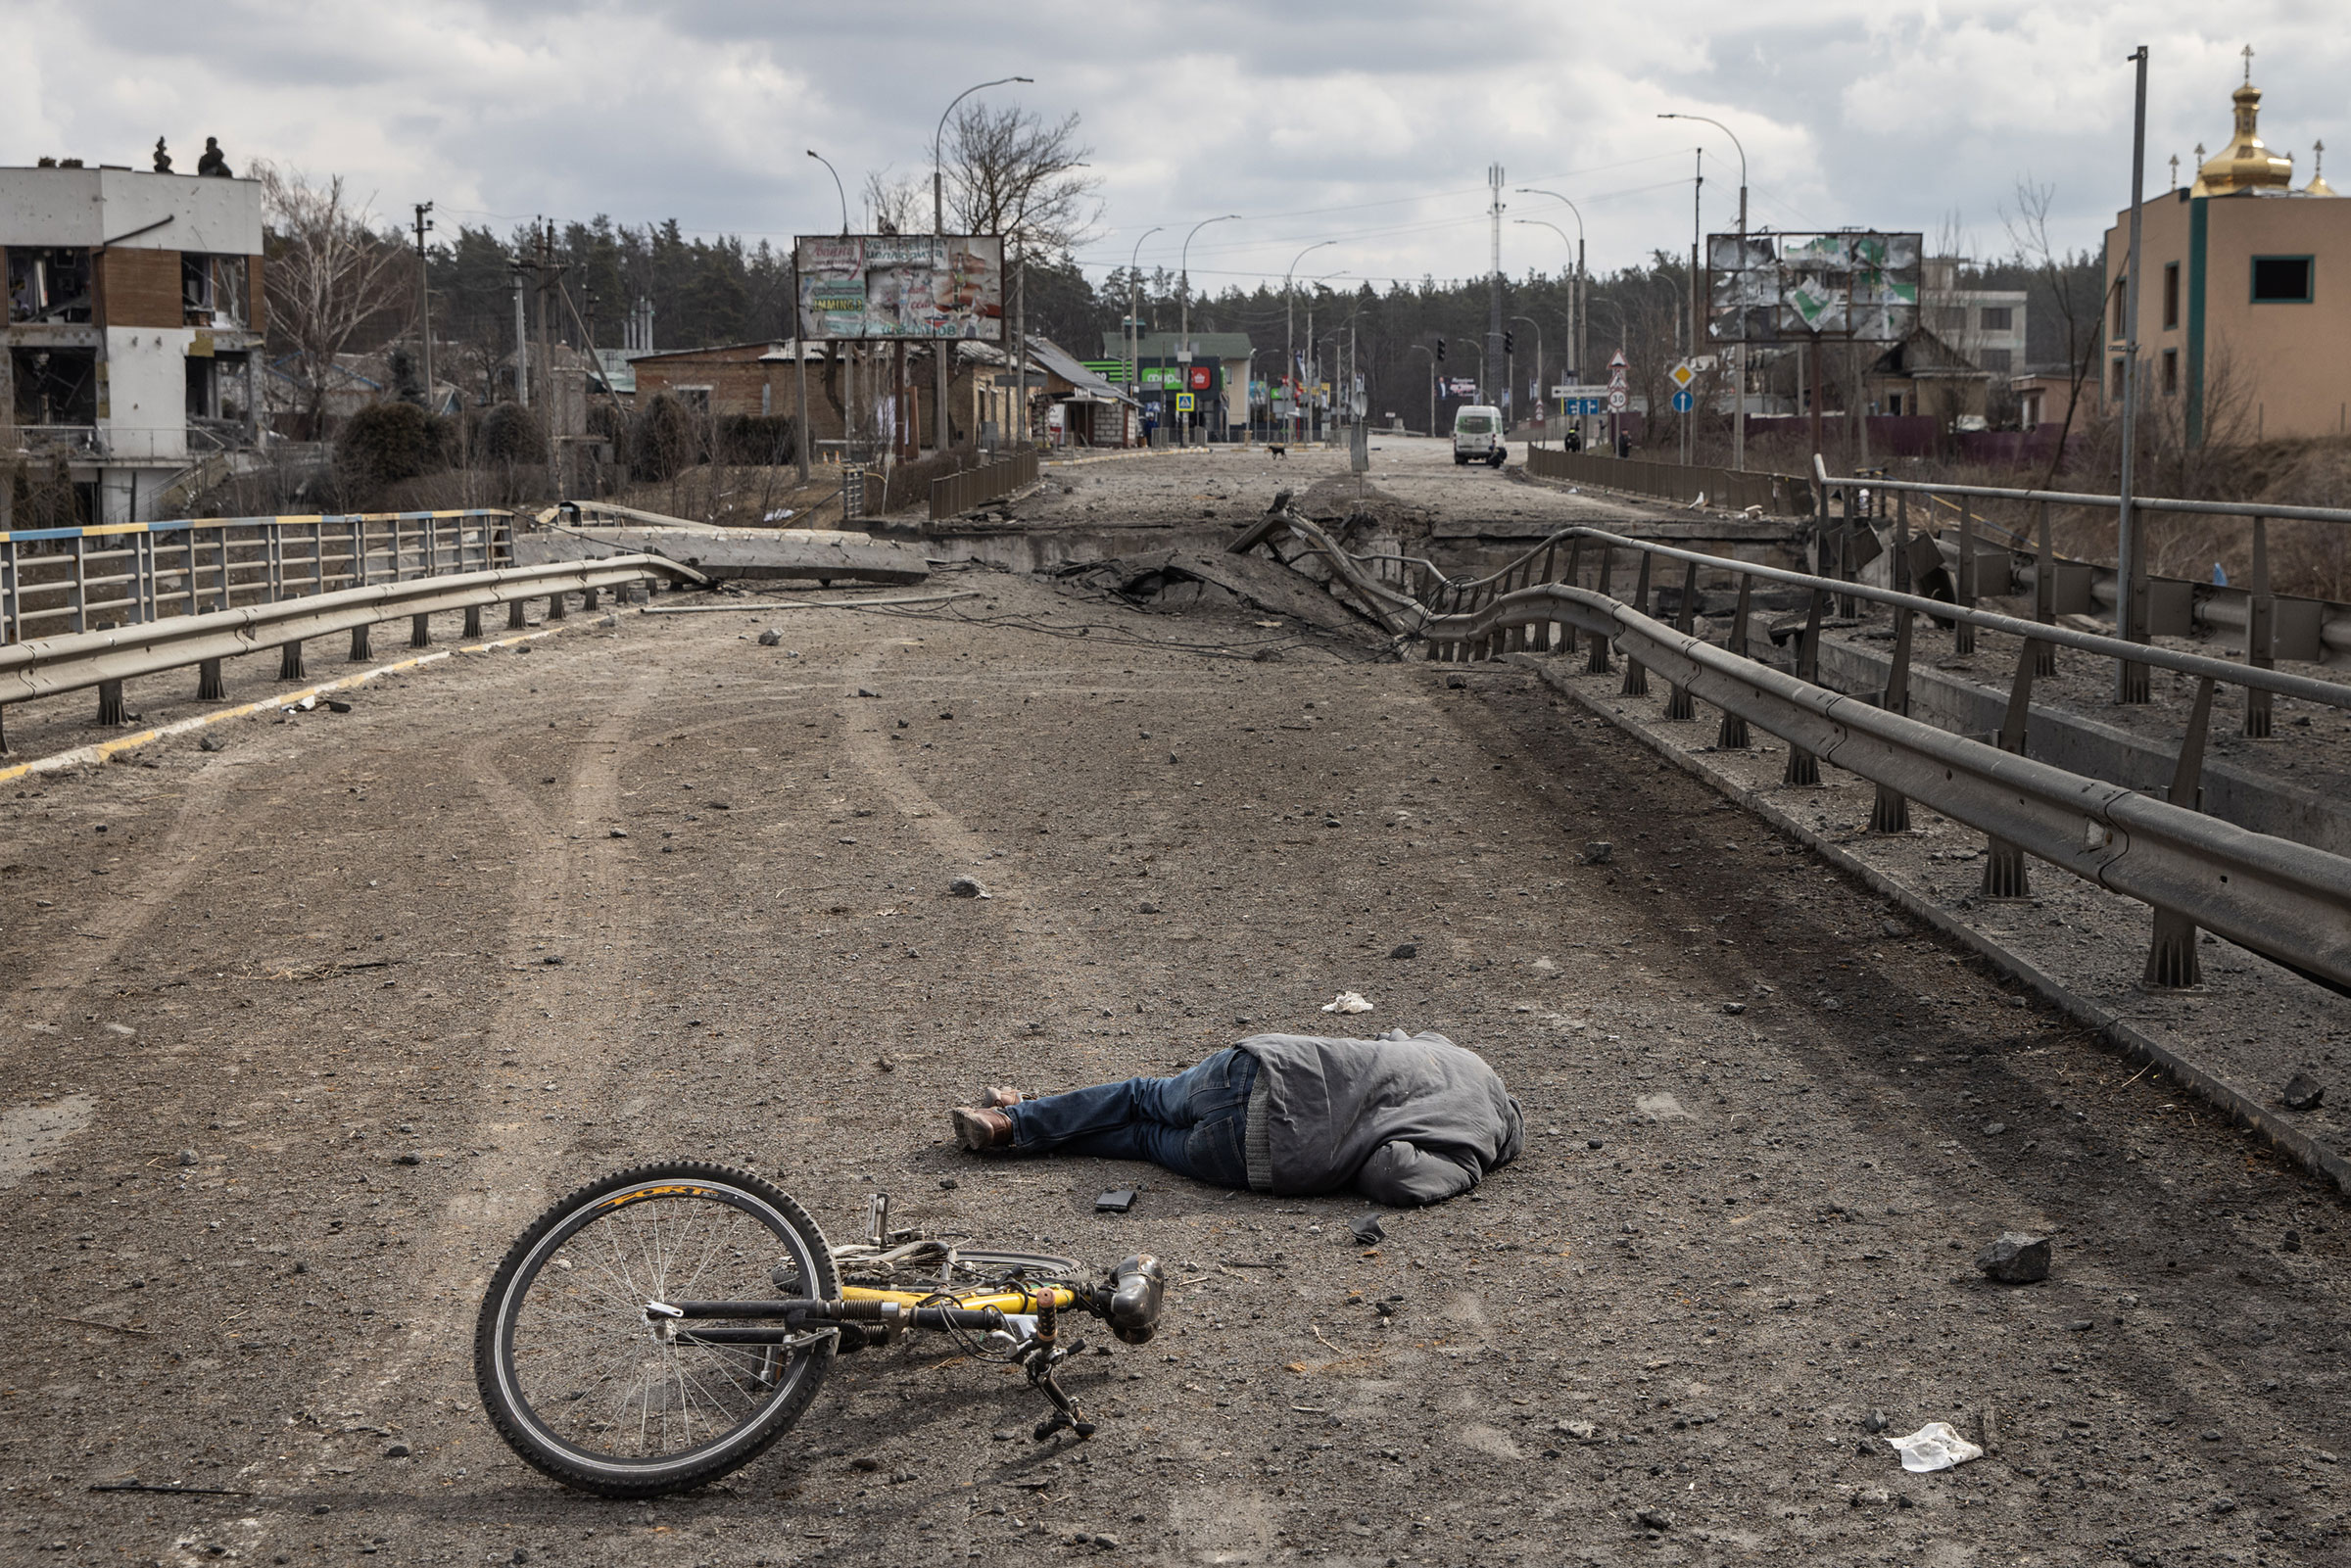 The body of a civilian, whose cause of death was not confirmed, is seen on a destroyed bridge used to evacuate residents from Irpin after Russian forces entered the city on March 7. Four civilians were killed on March 6 by mortar fire along the road leading from Irpin to Kyiv, which has been a key evacuation route for people fleeing Russian forces advancing from the north.